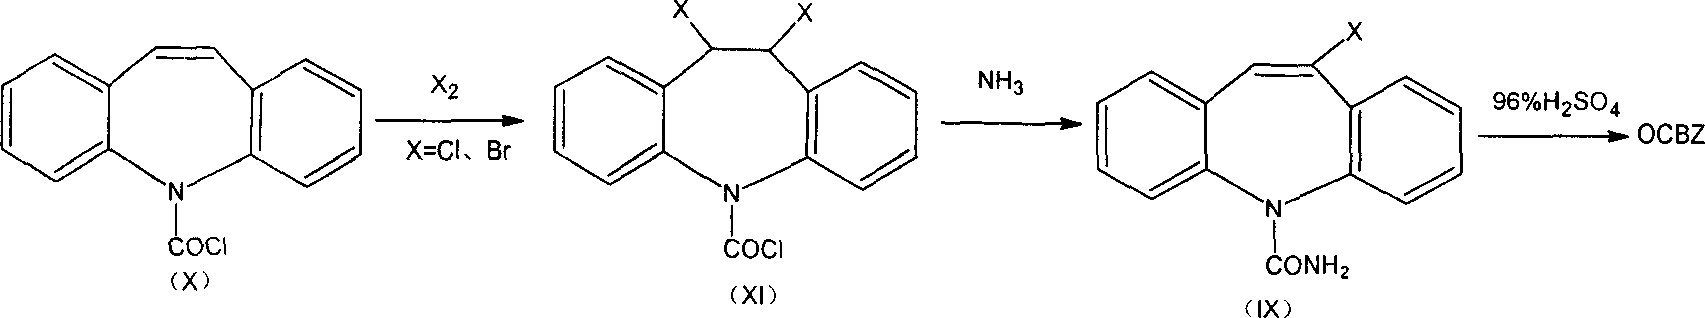 Oxcarbazepine and synthesizing process of its intermediate